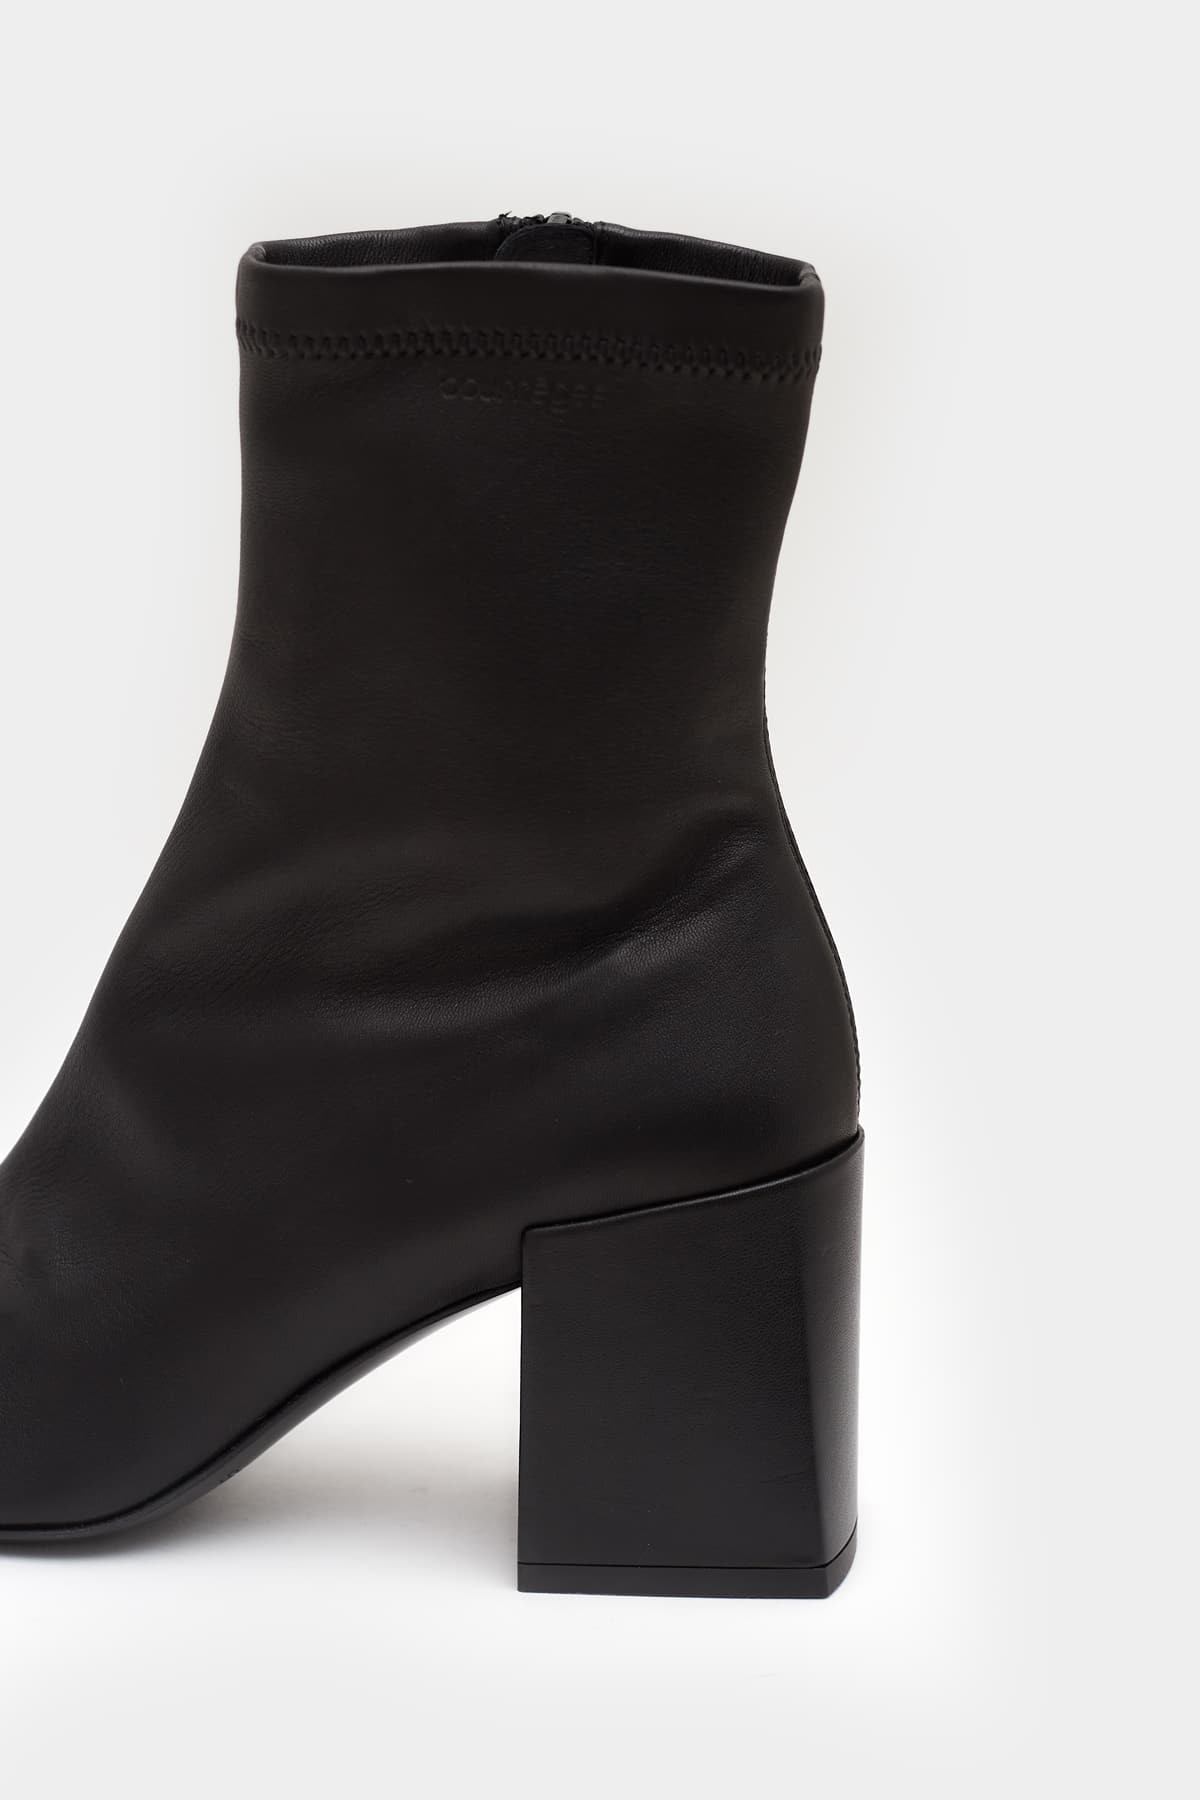 COURREGES BLACK HERITAGE ANKLE BOOTS | IAMNUE